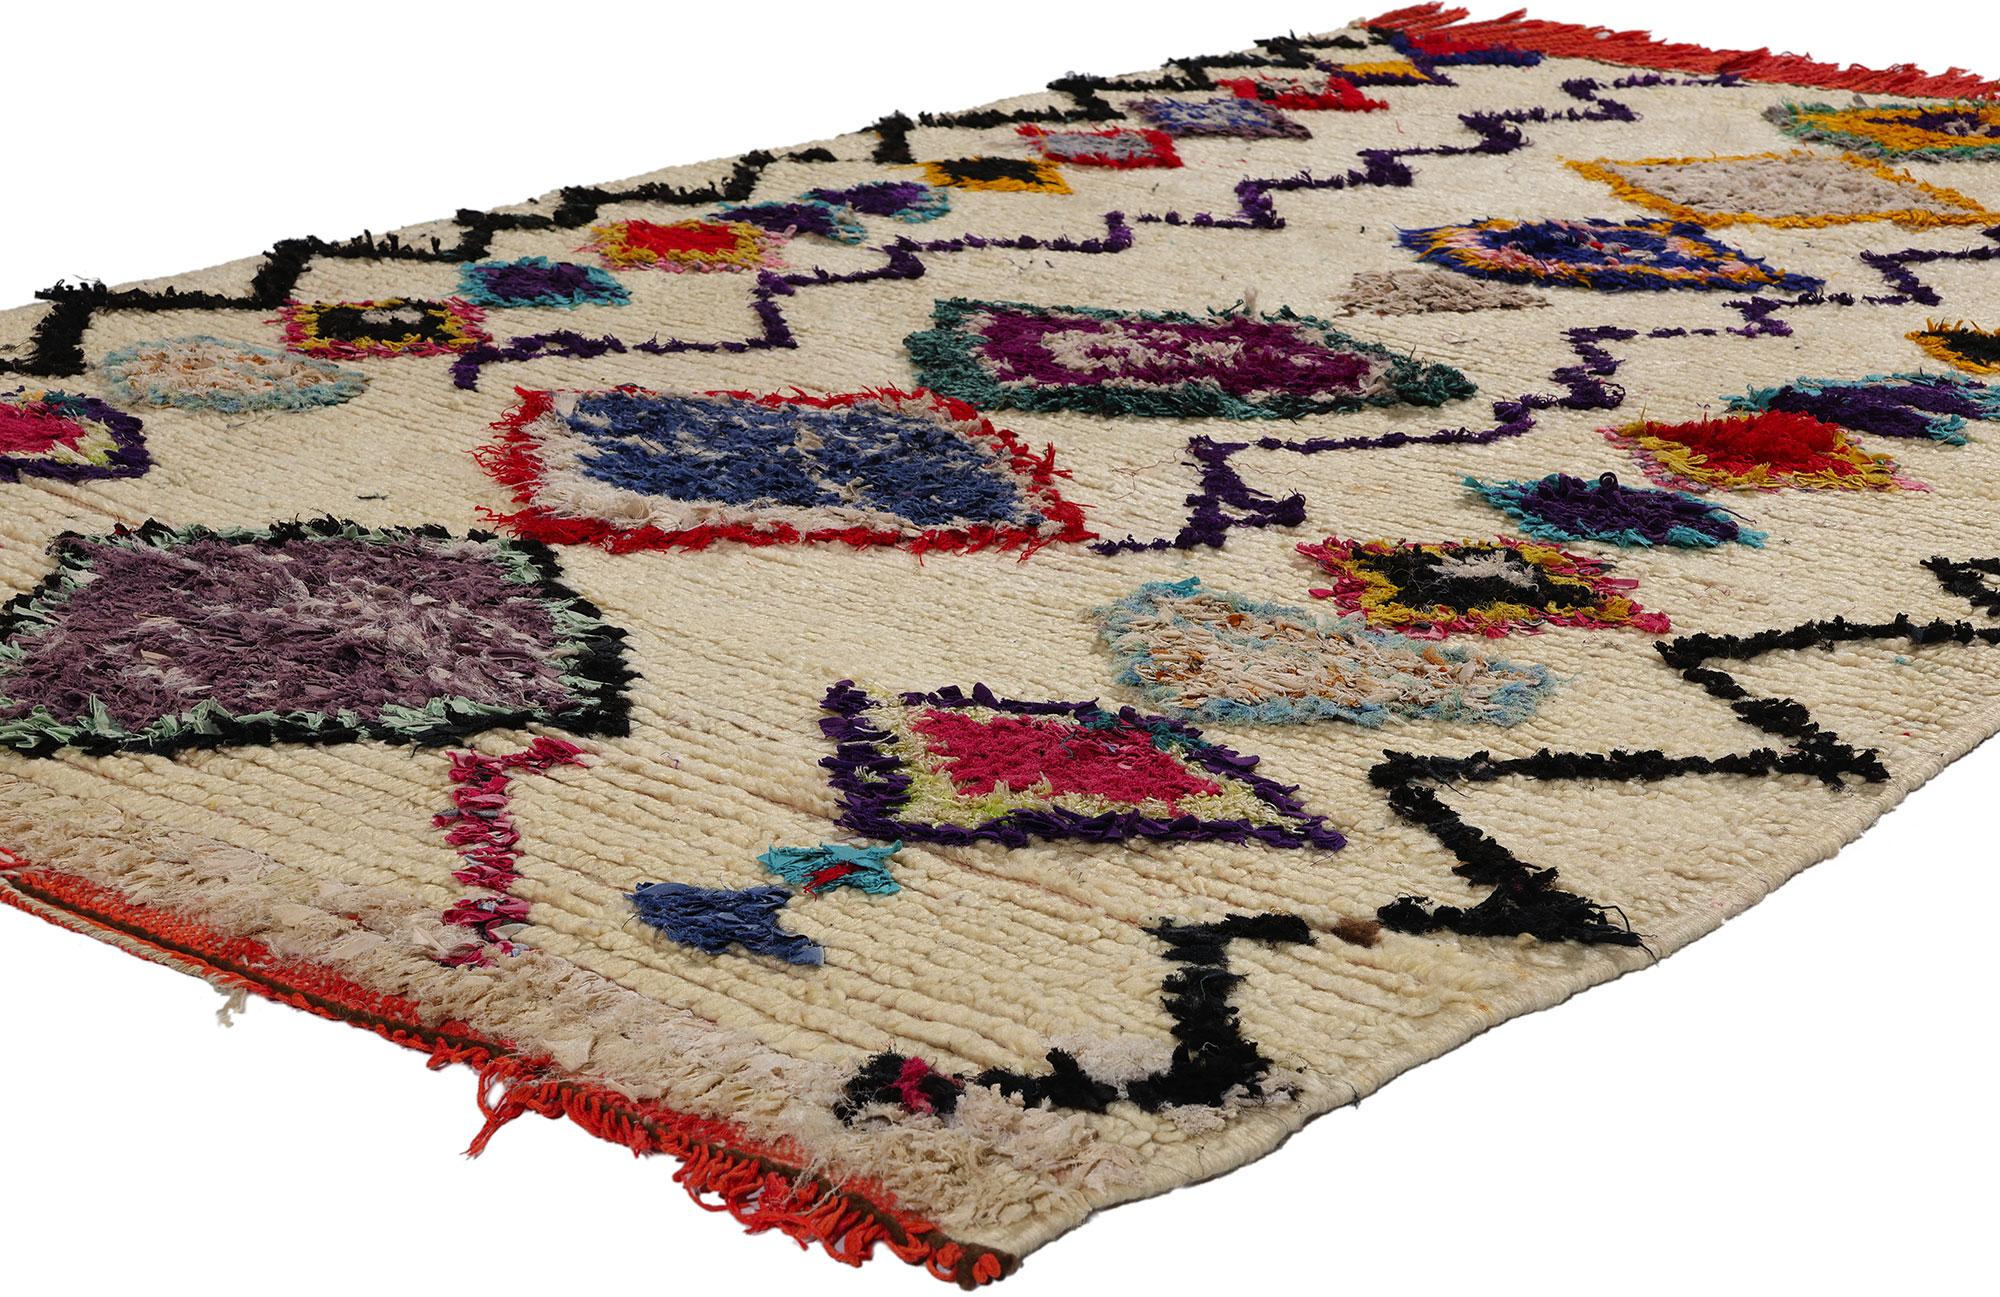 21792 Vintage Boucherouite Moroccan Azilal Rag Rug, 04'09 x 07'02. Azilal rag rugs, fondly referred to as Azilal Boucherouite rugs, narrate a tale of sustainable craftsmanship resonating from the heart of the Azilal region in the Atlas Mountains of